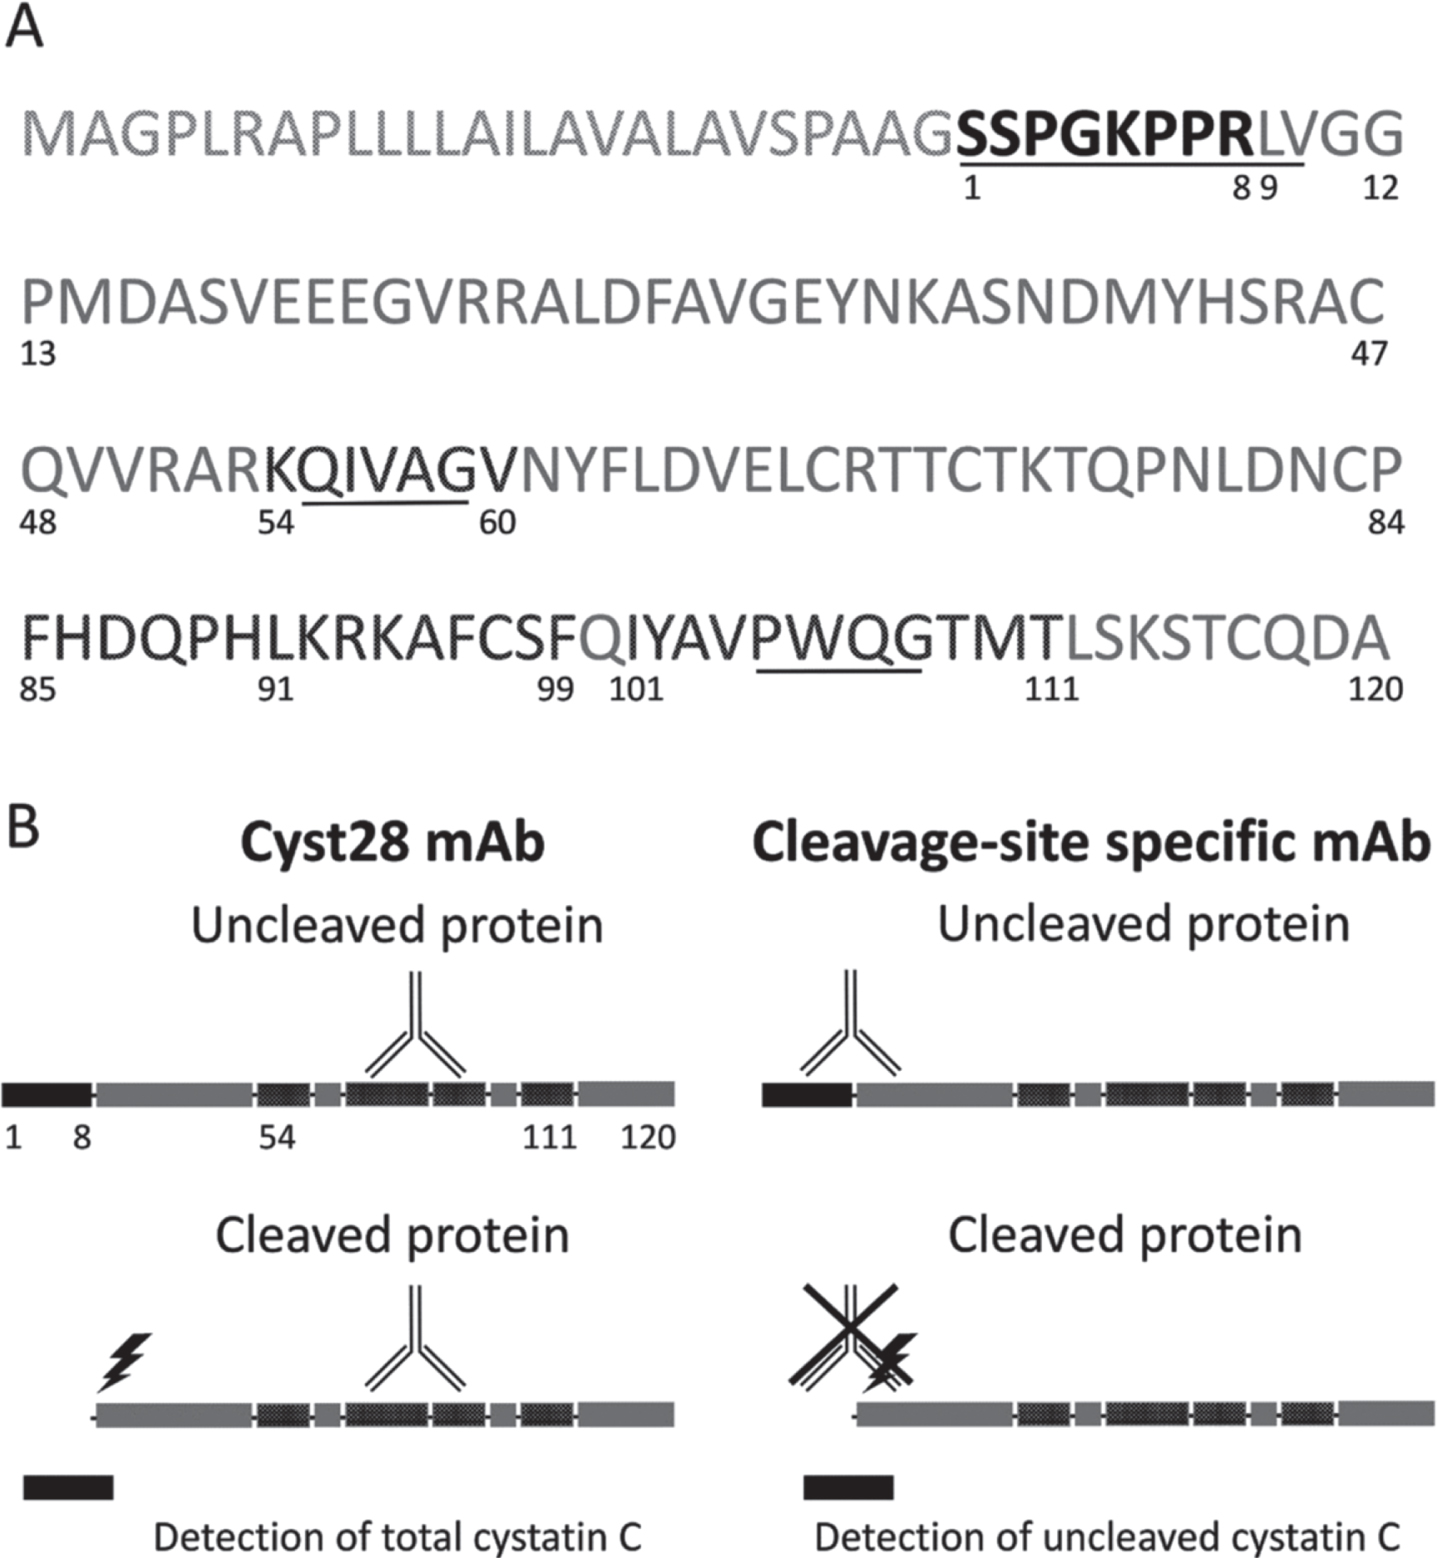 Cystatin C protein and the ELISA assay. (A) Amino acid sequence of Cystatin C. The N-terminal octapeptide is highlighted in black (the preceding 26 amino acids are cleaved before the mature protein is secreted). The epitope recognized by mAb Cyst28 encompasses residues 54 -60, 85 -91, 92 -99 and 101 – 111 and is highlighted in darker grey. The sequences interacting with target proteolytic enzymes are underlined. (B) Schematic representation of secreted Cystatin C, showing the targets of the antibodies used in the ELISA. The mAb Cyst28 detects both octapeptide-uncleaved and cleaved cystatin C. The cleavage site-specific antibody recognizes specifically the octapeptide-uncleaved cystatin C.